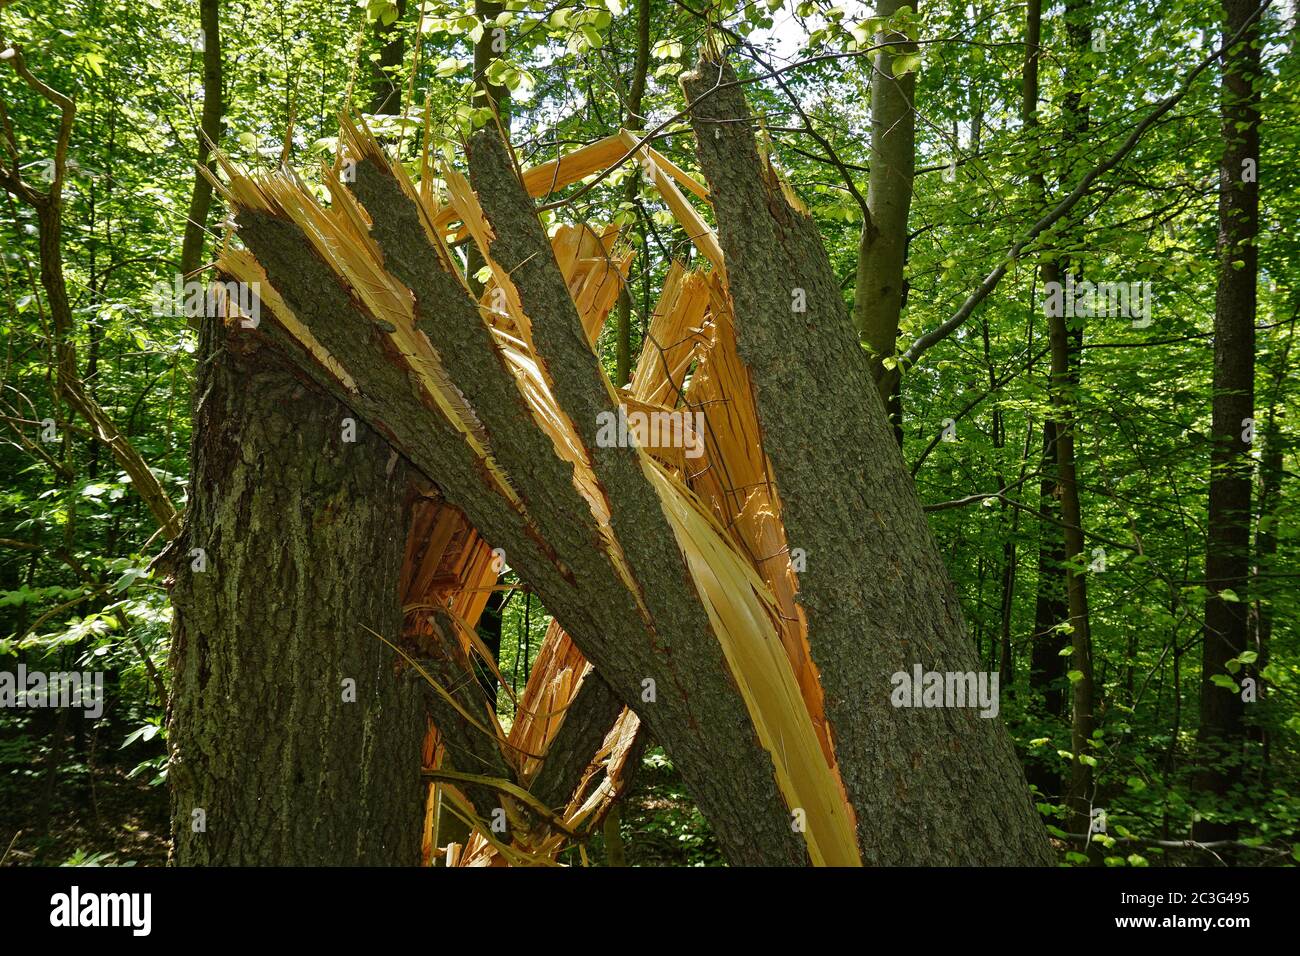 Storm damage in the spruce forest Stock Photo